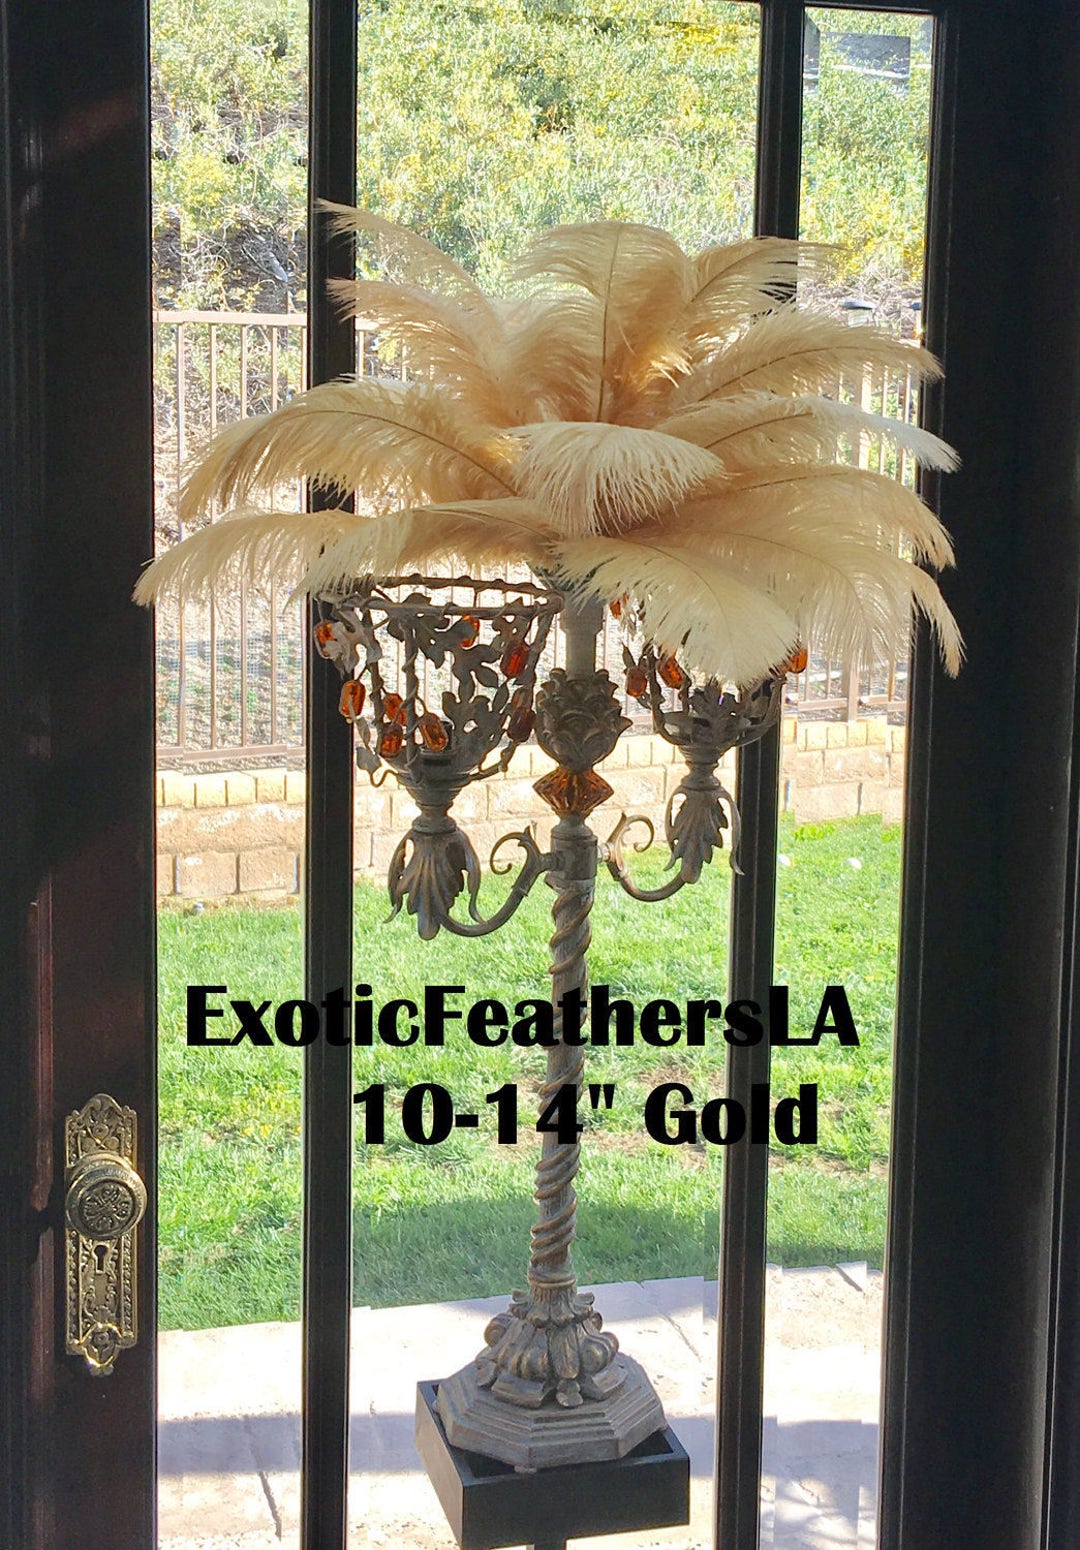 White Ostrich Feathers Plumes, DRABS 13 to 16 Inch, 1 to 100 Pcs. USA  Store.centerpieces,samba,carnival,mardi Gras,weddings,burlesque 